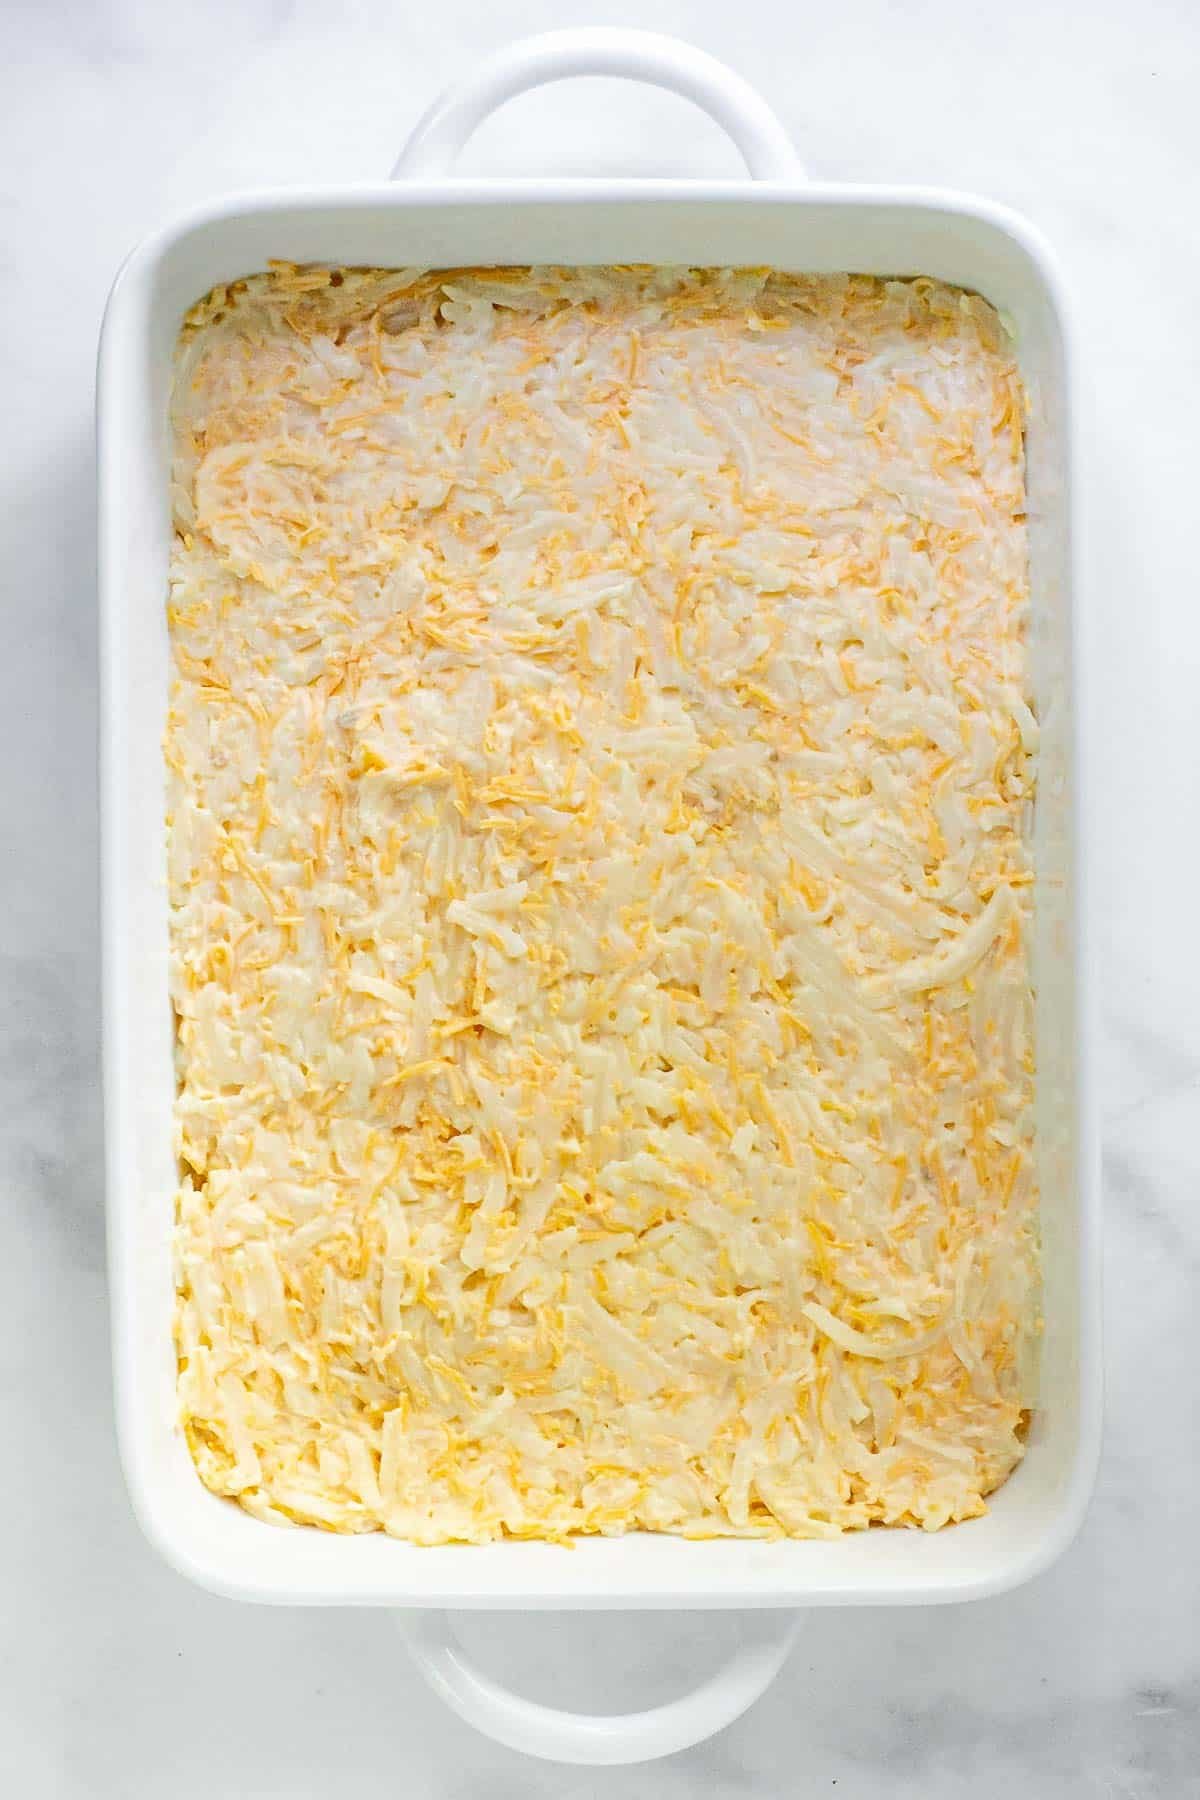 white rectangle casserole dish with hash brown and cheese mixture spread evenly.